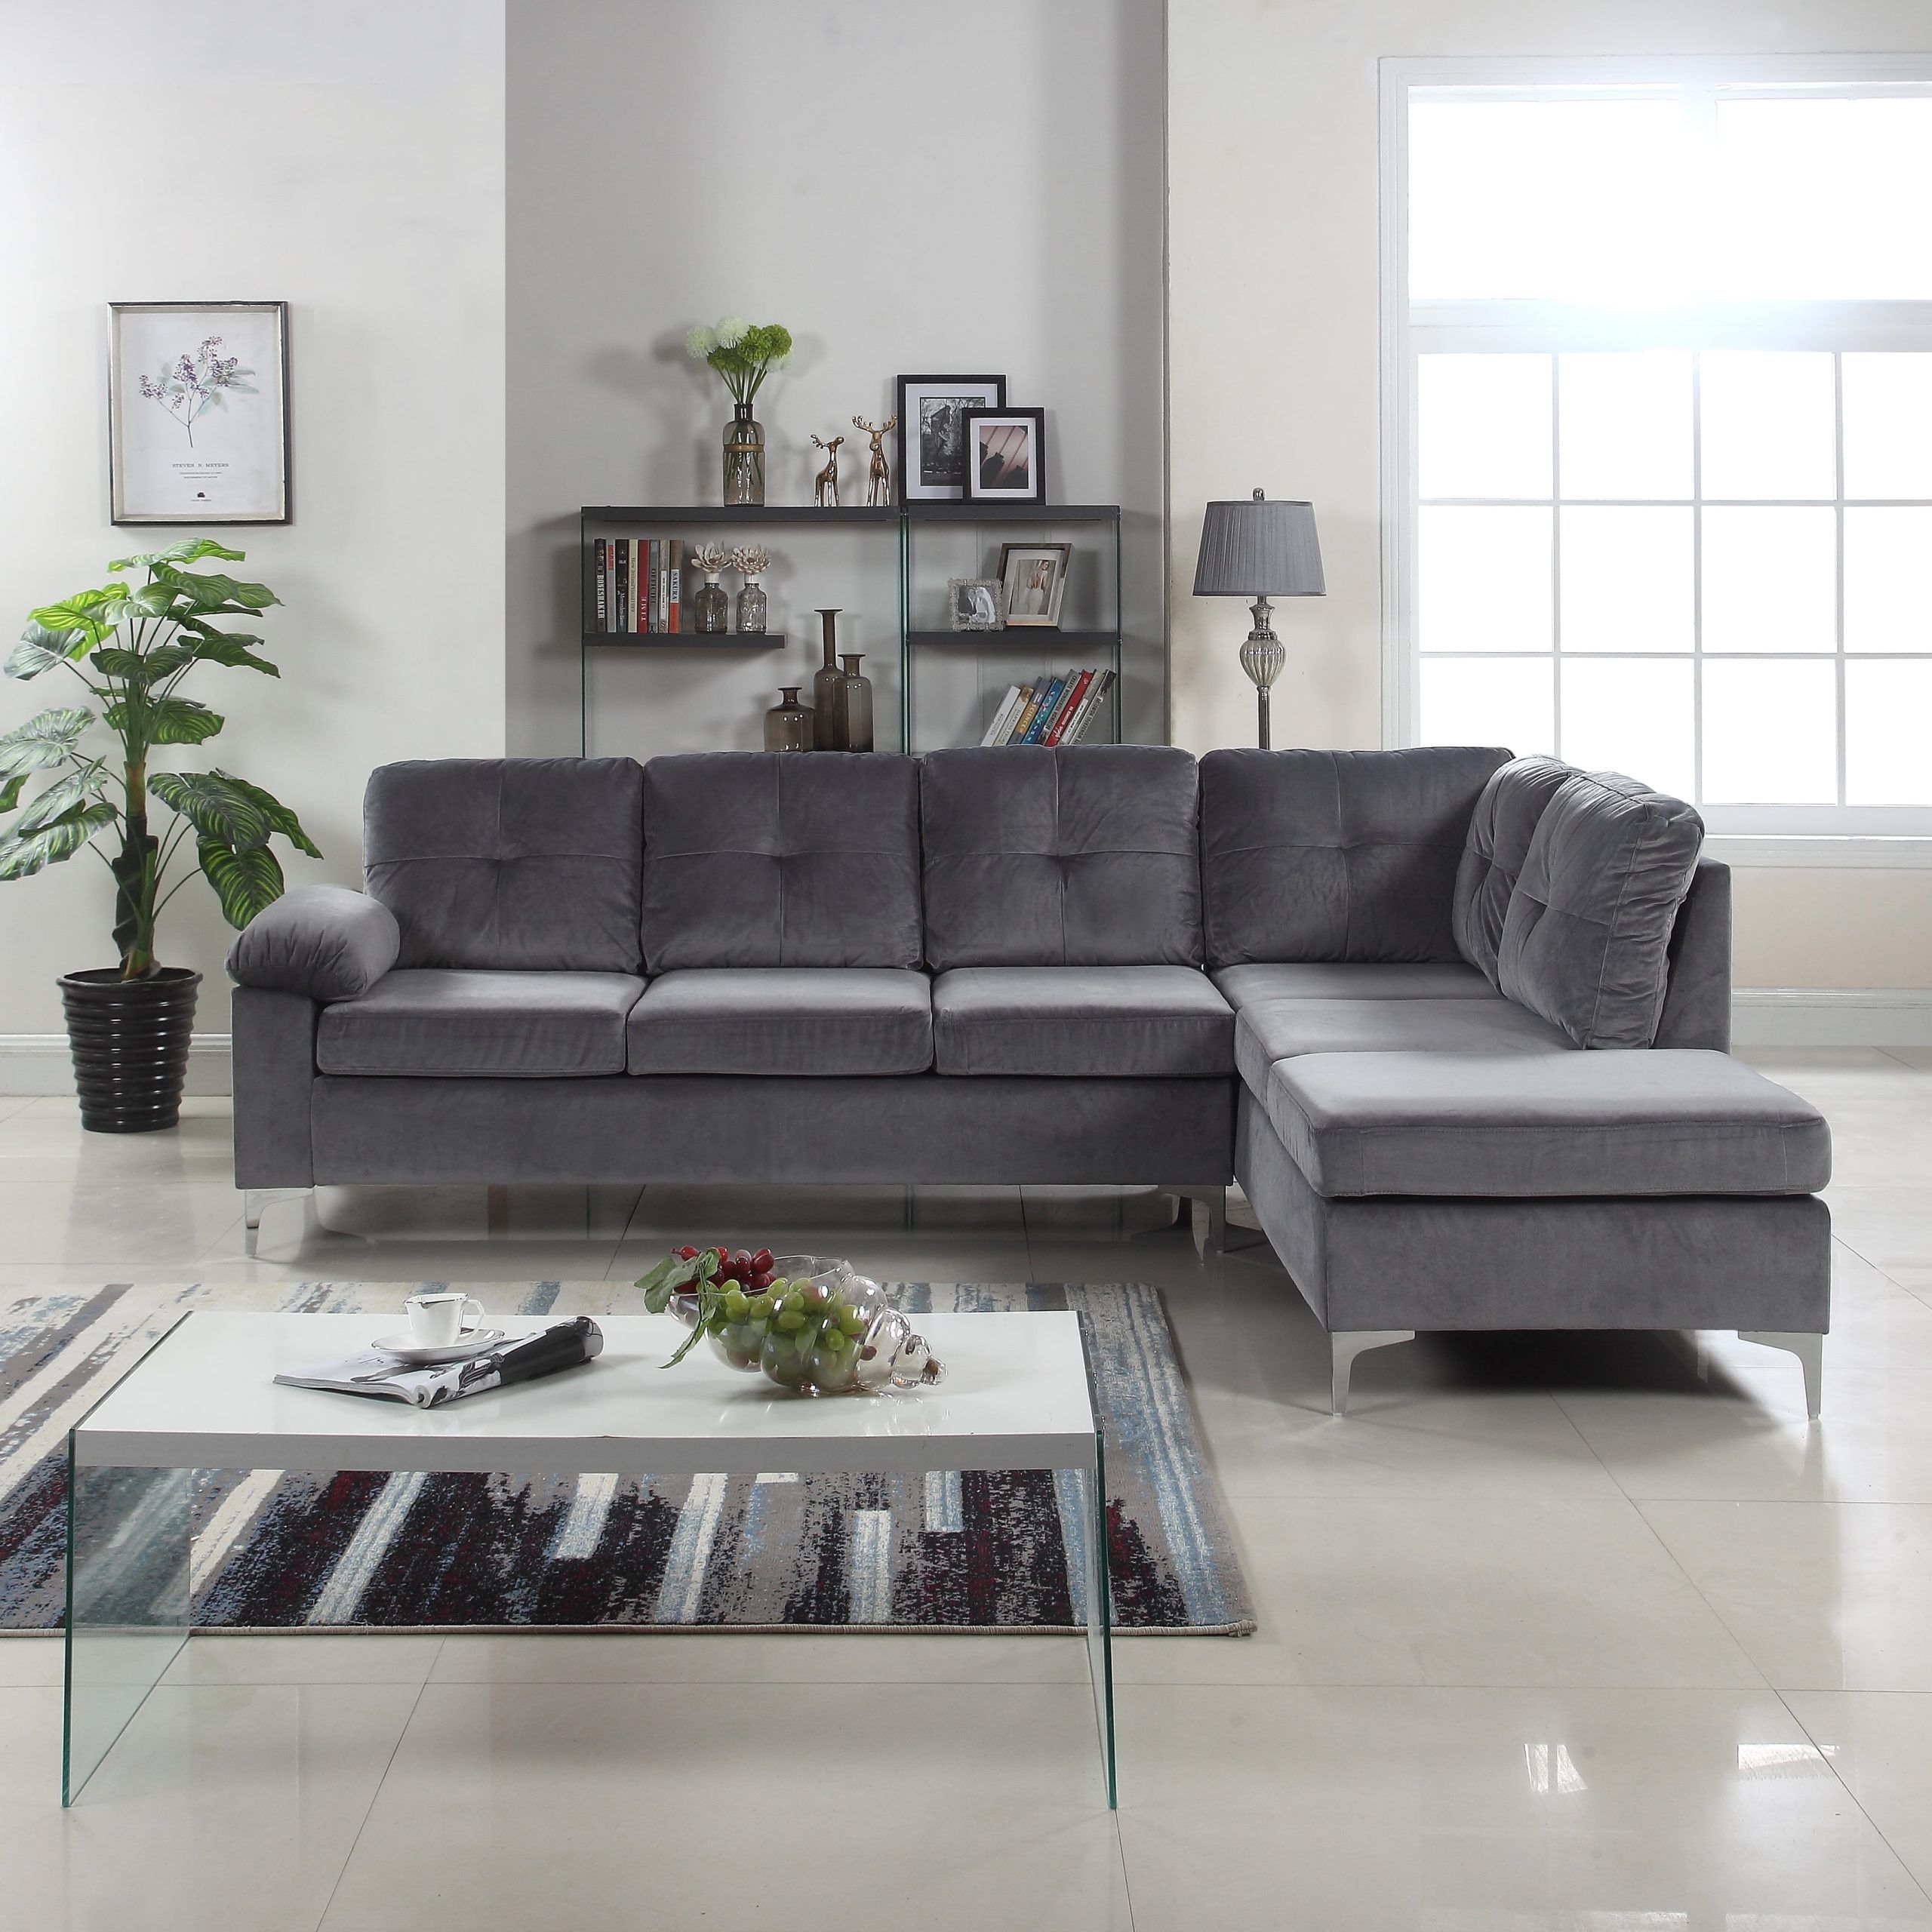 Tufted Brush Microfiber Sectional Sofa, Large L Shape Couch, Dark Grey Intended For Dark Grey Polyester Sofa Couches (Gallery 12 of 20)